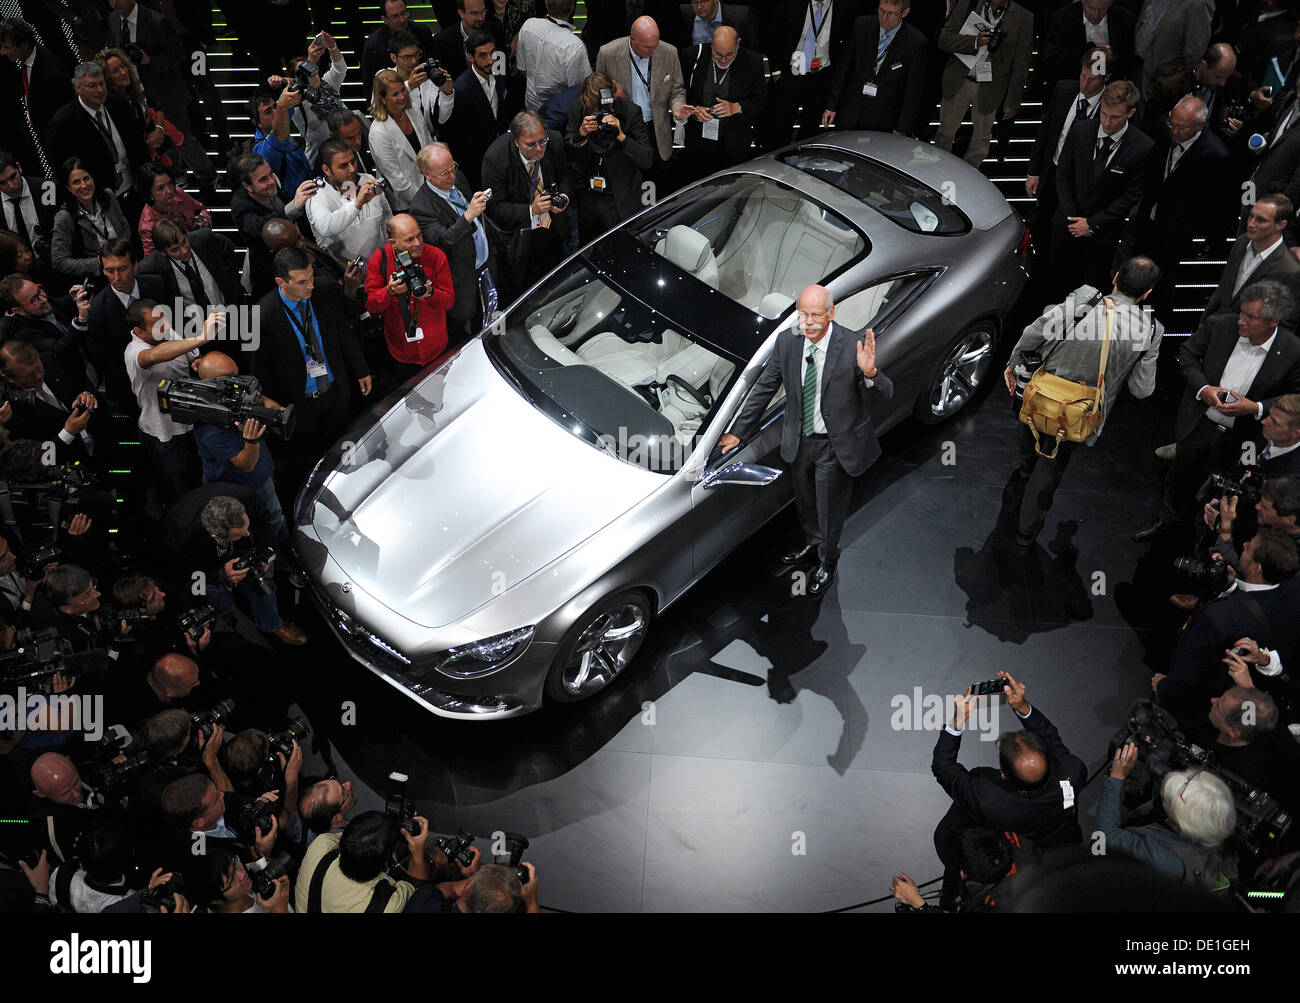 Frankfurt, Germany. 10th Sep, 2013. Chairman Dieter Zetsche stands next to the new Concept S-Class Coupe at the Mercedes Benz stand during the press day of the Frankfurt Motor Show IAA in Frankfurt, Germany, 10 September 2013. One of the most important car exhibitions in the world, Frankfurt Motor Show will be opened officially 12 September by German Chancellor Angela Merkel, running until 22 September 2013. Photo: UWE ZUCCHI/dpa/Alamy Live News/dpa/Alamy Live News Stock Photo